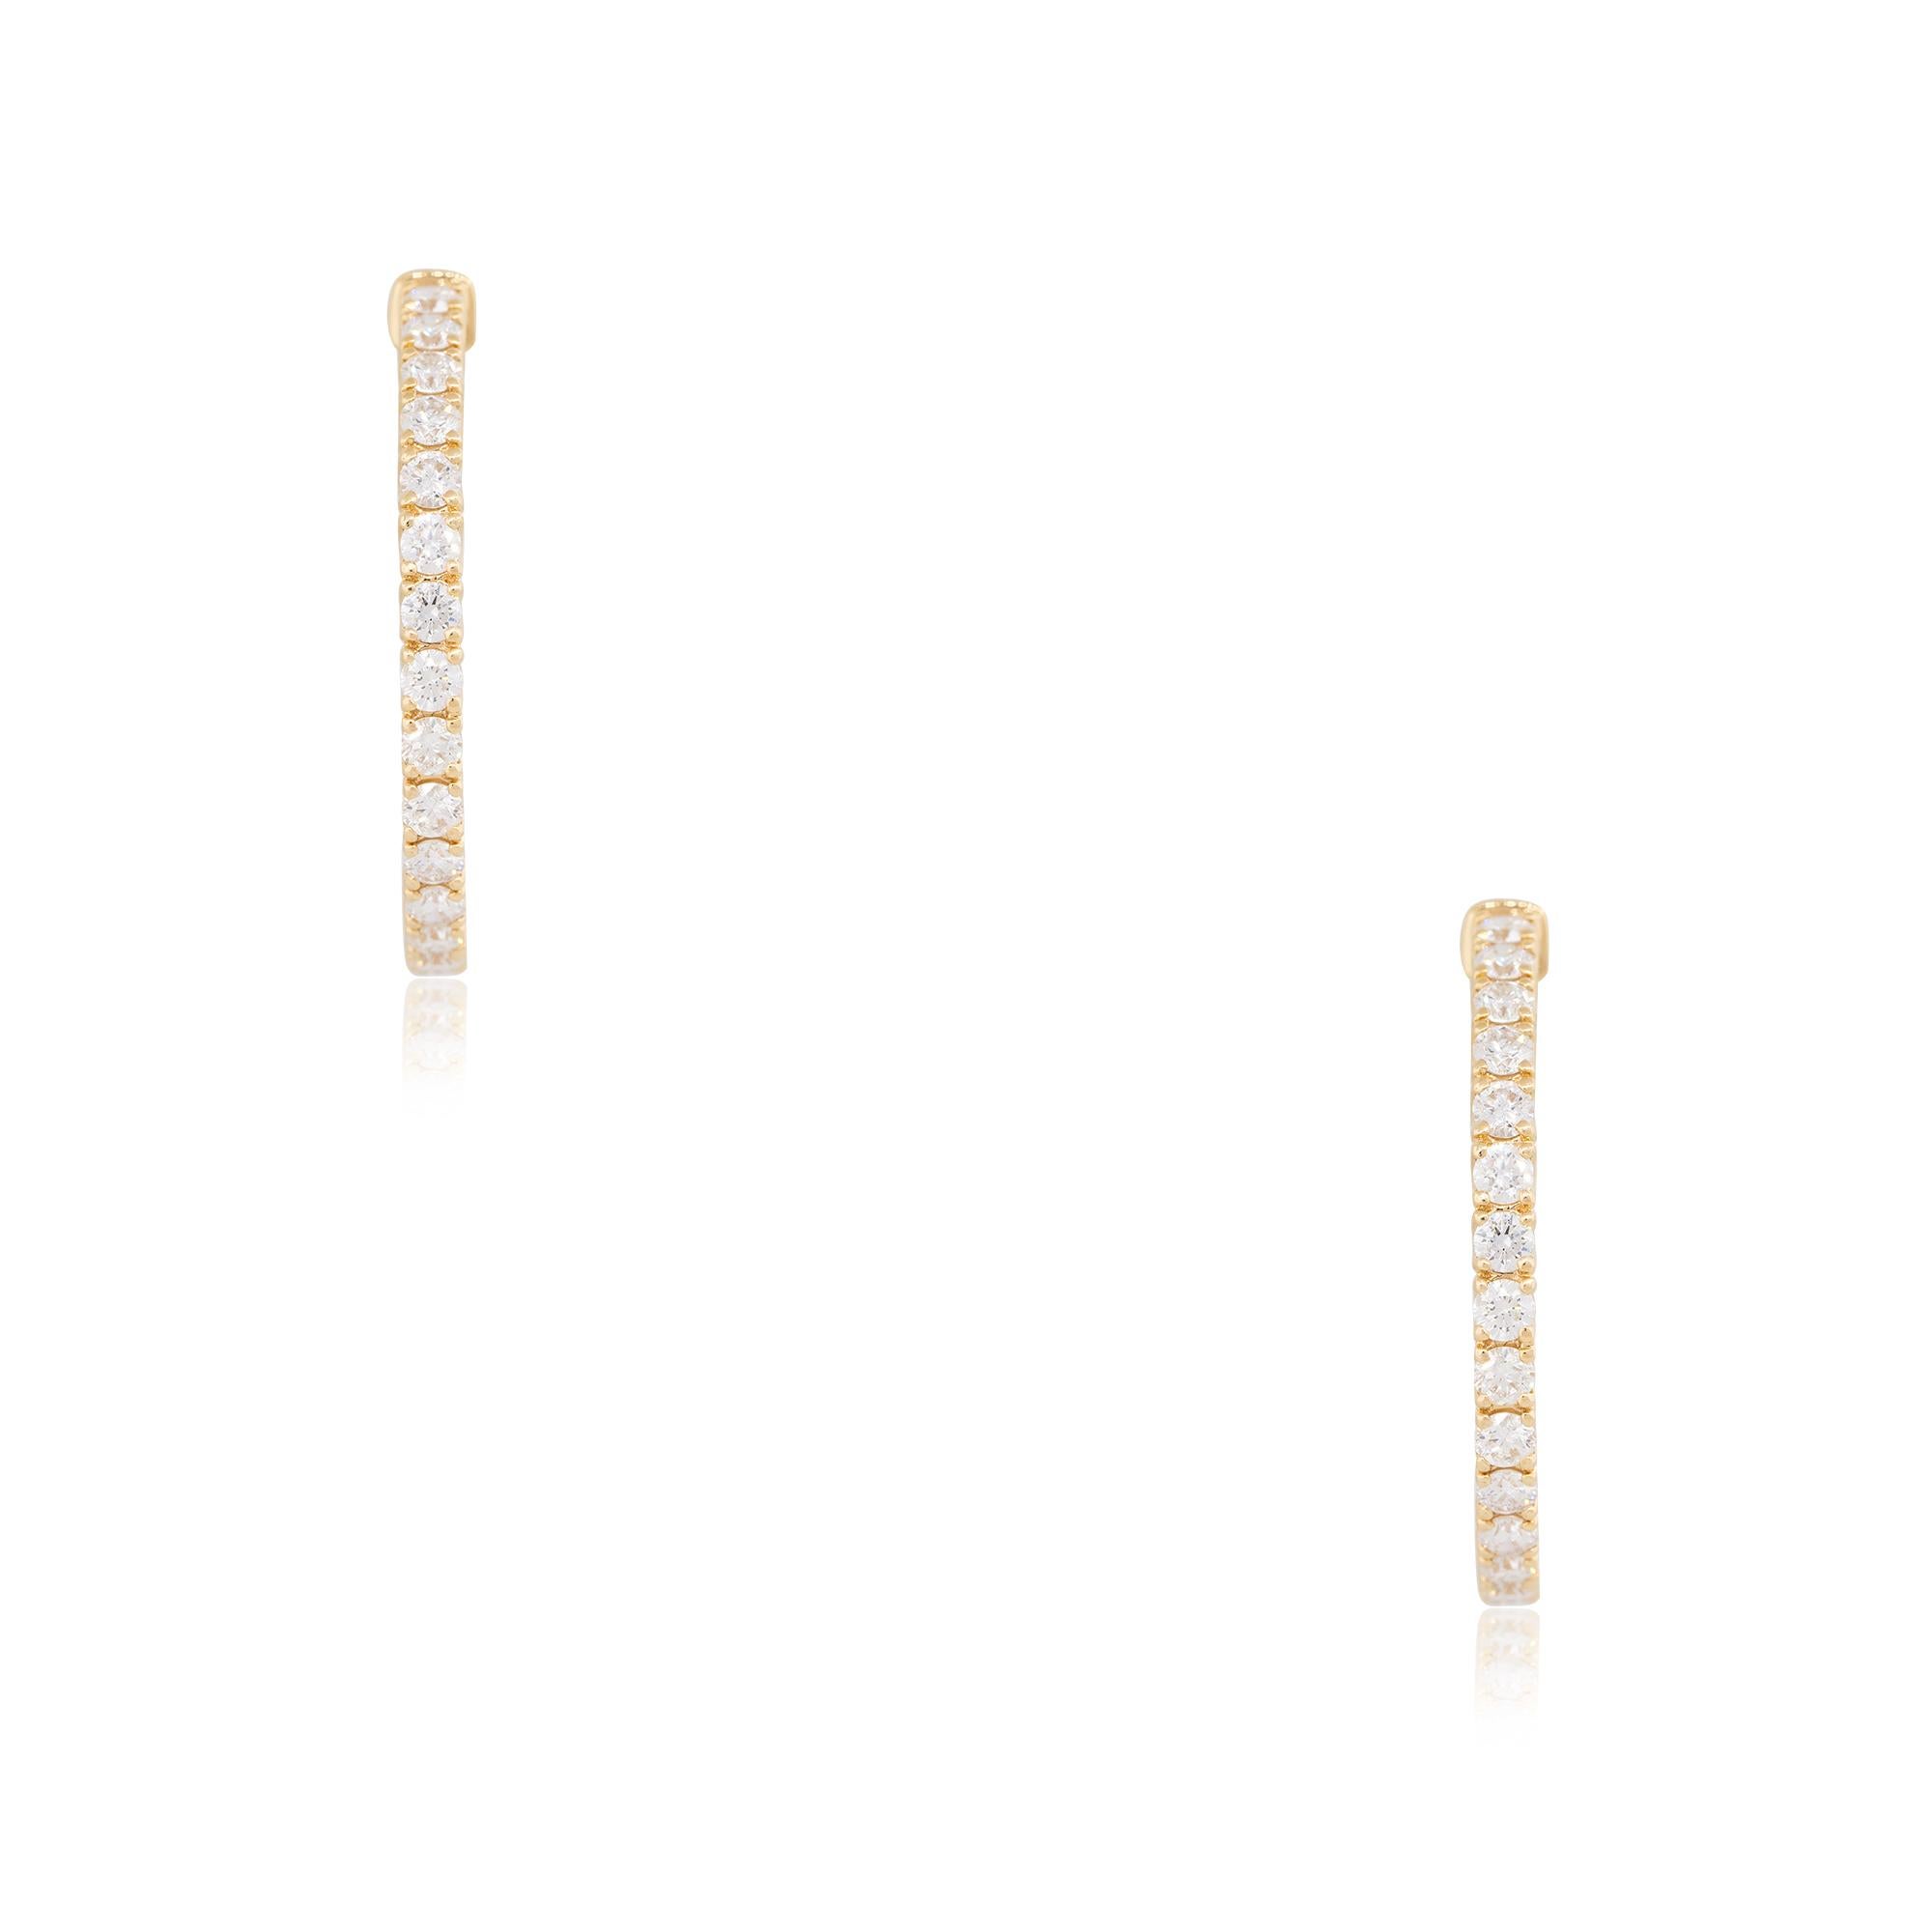 18k Yellow Gold 4.24ctw Round Brilliant cut Diamond Inside-Out Hoop Earrings
Product: Inside Out Diamond Hoop Earrings
Material: 18k Yellow Gold
Diamond Details: There are approximately 4.24 carats of Round Brilliant cut diamonds, all prong set. (52